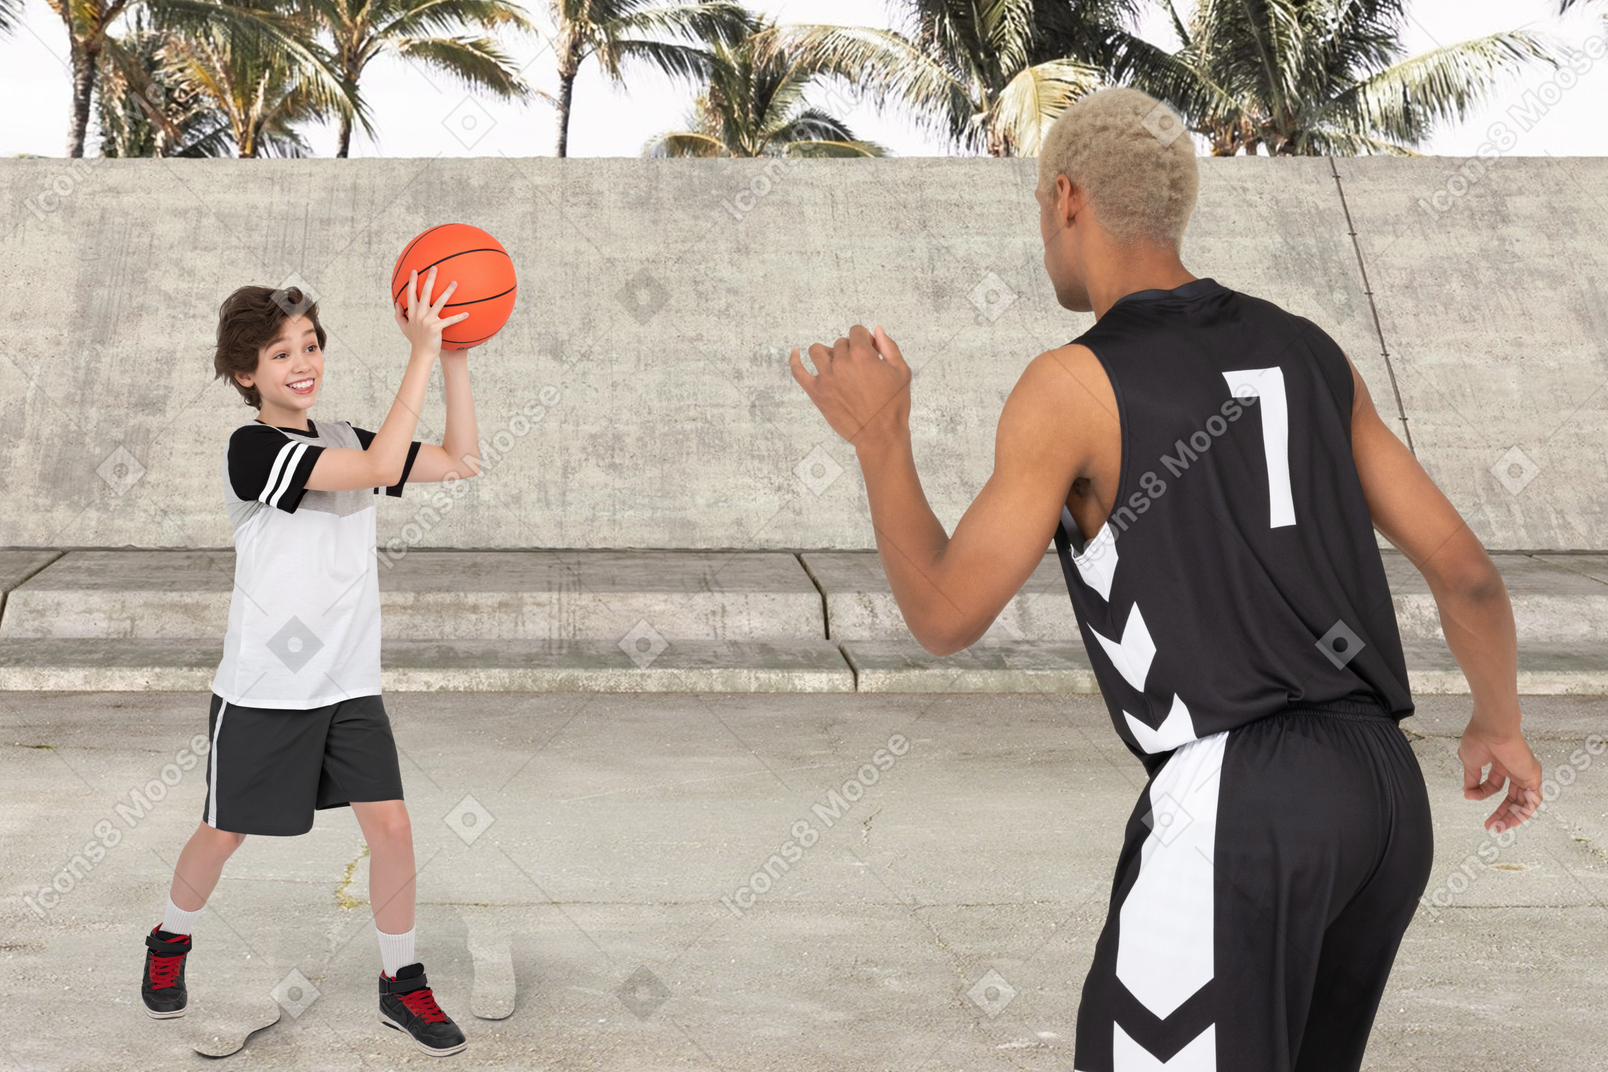 A young boy and a man playing basketball